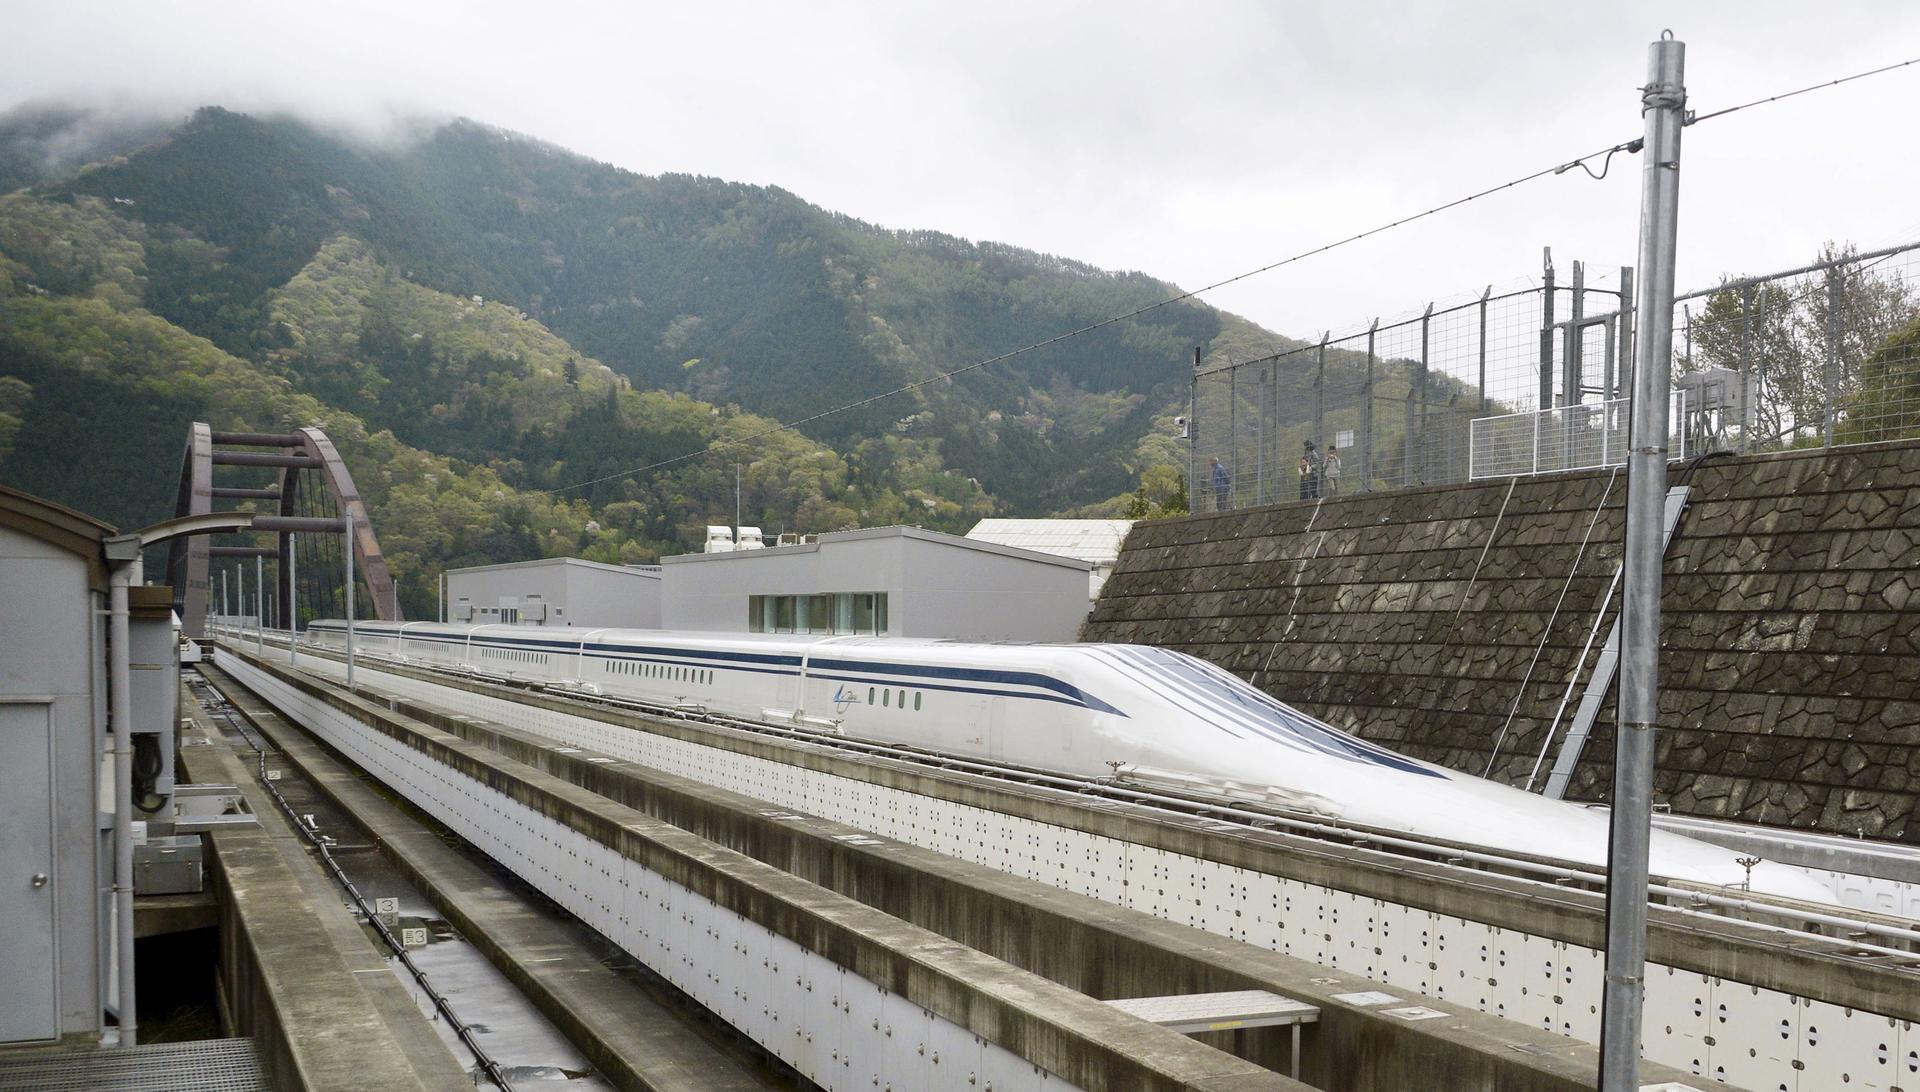 A magnetically levitating (maglev) train operated by Central Japan Railway